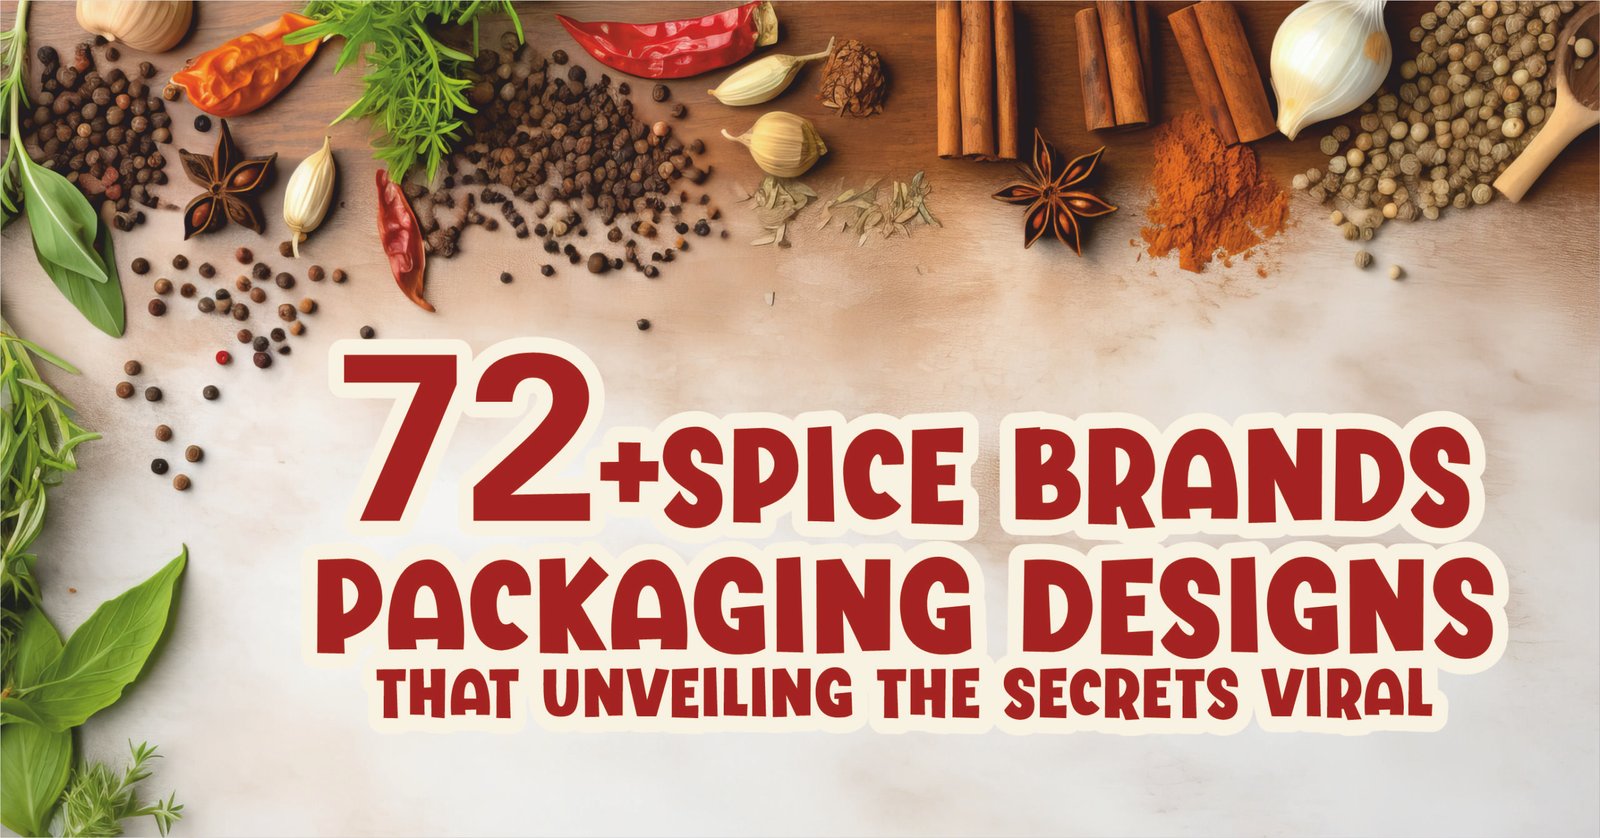 72+Spice Brands Packaging Designs That Unveiling the Secrets Viral